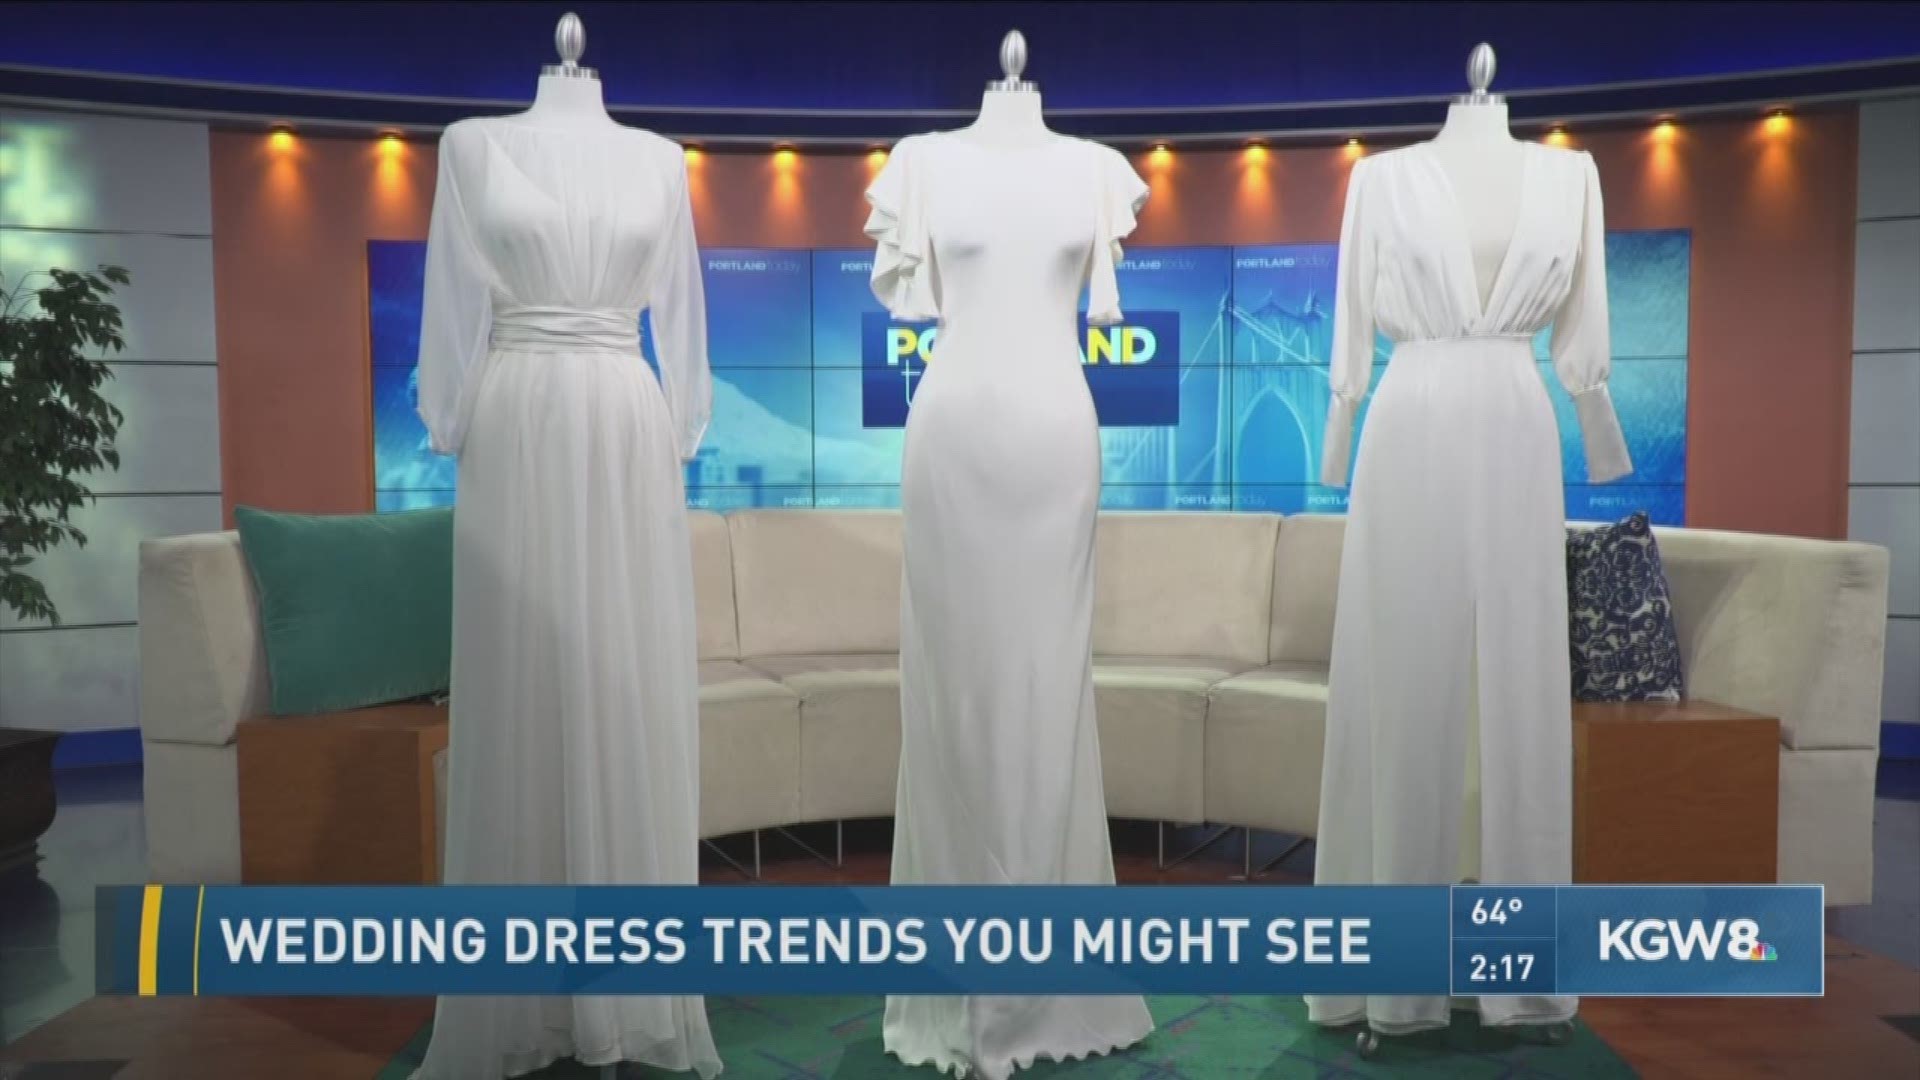 Wedding dress trends you might see